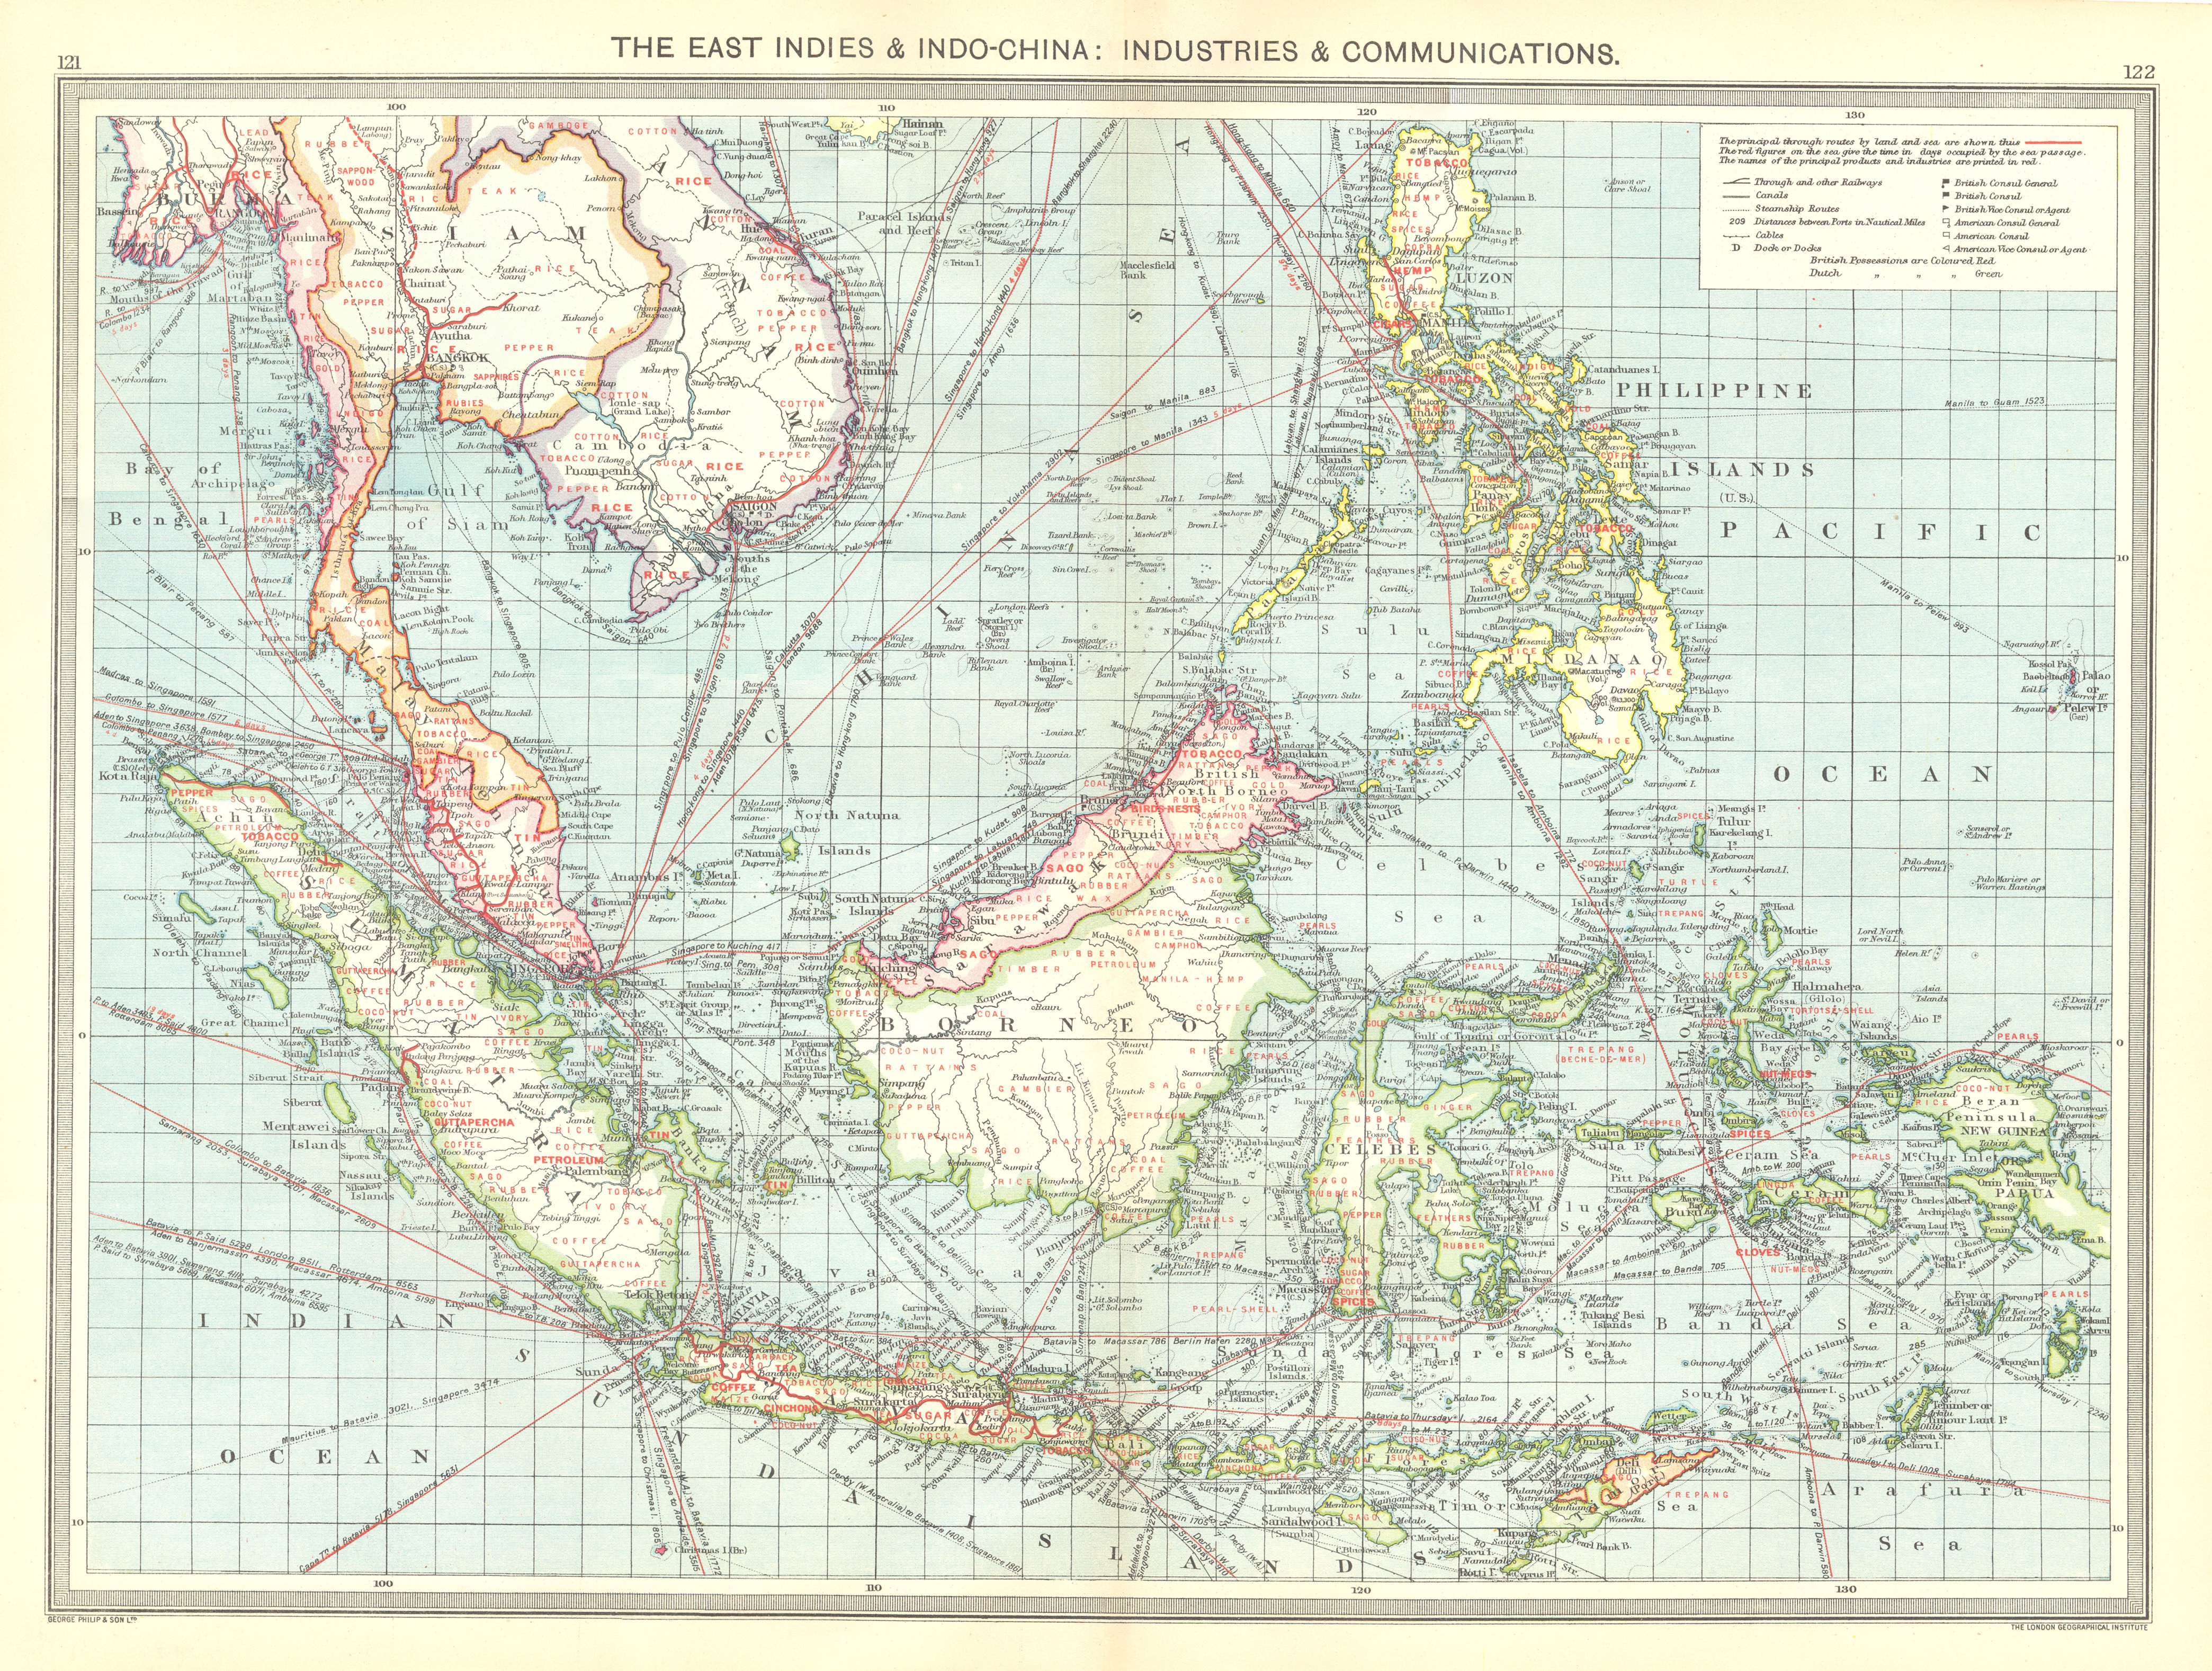 Associate Product ASIA. East Indies & Indo-China. Industries & Communications 1907 old map